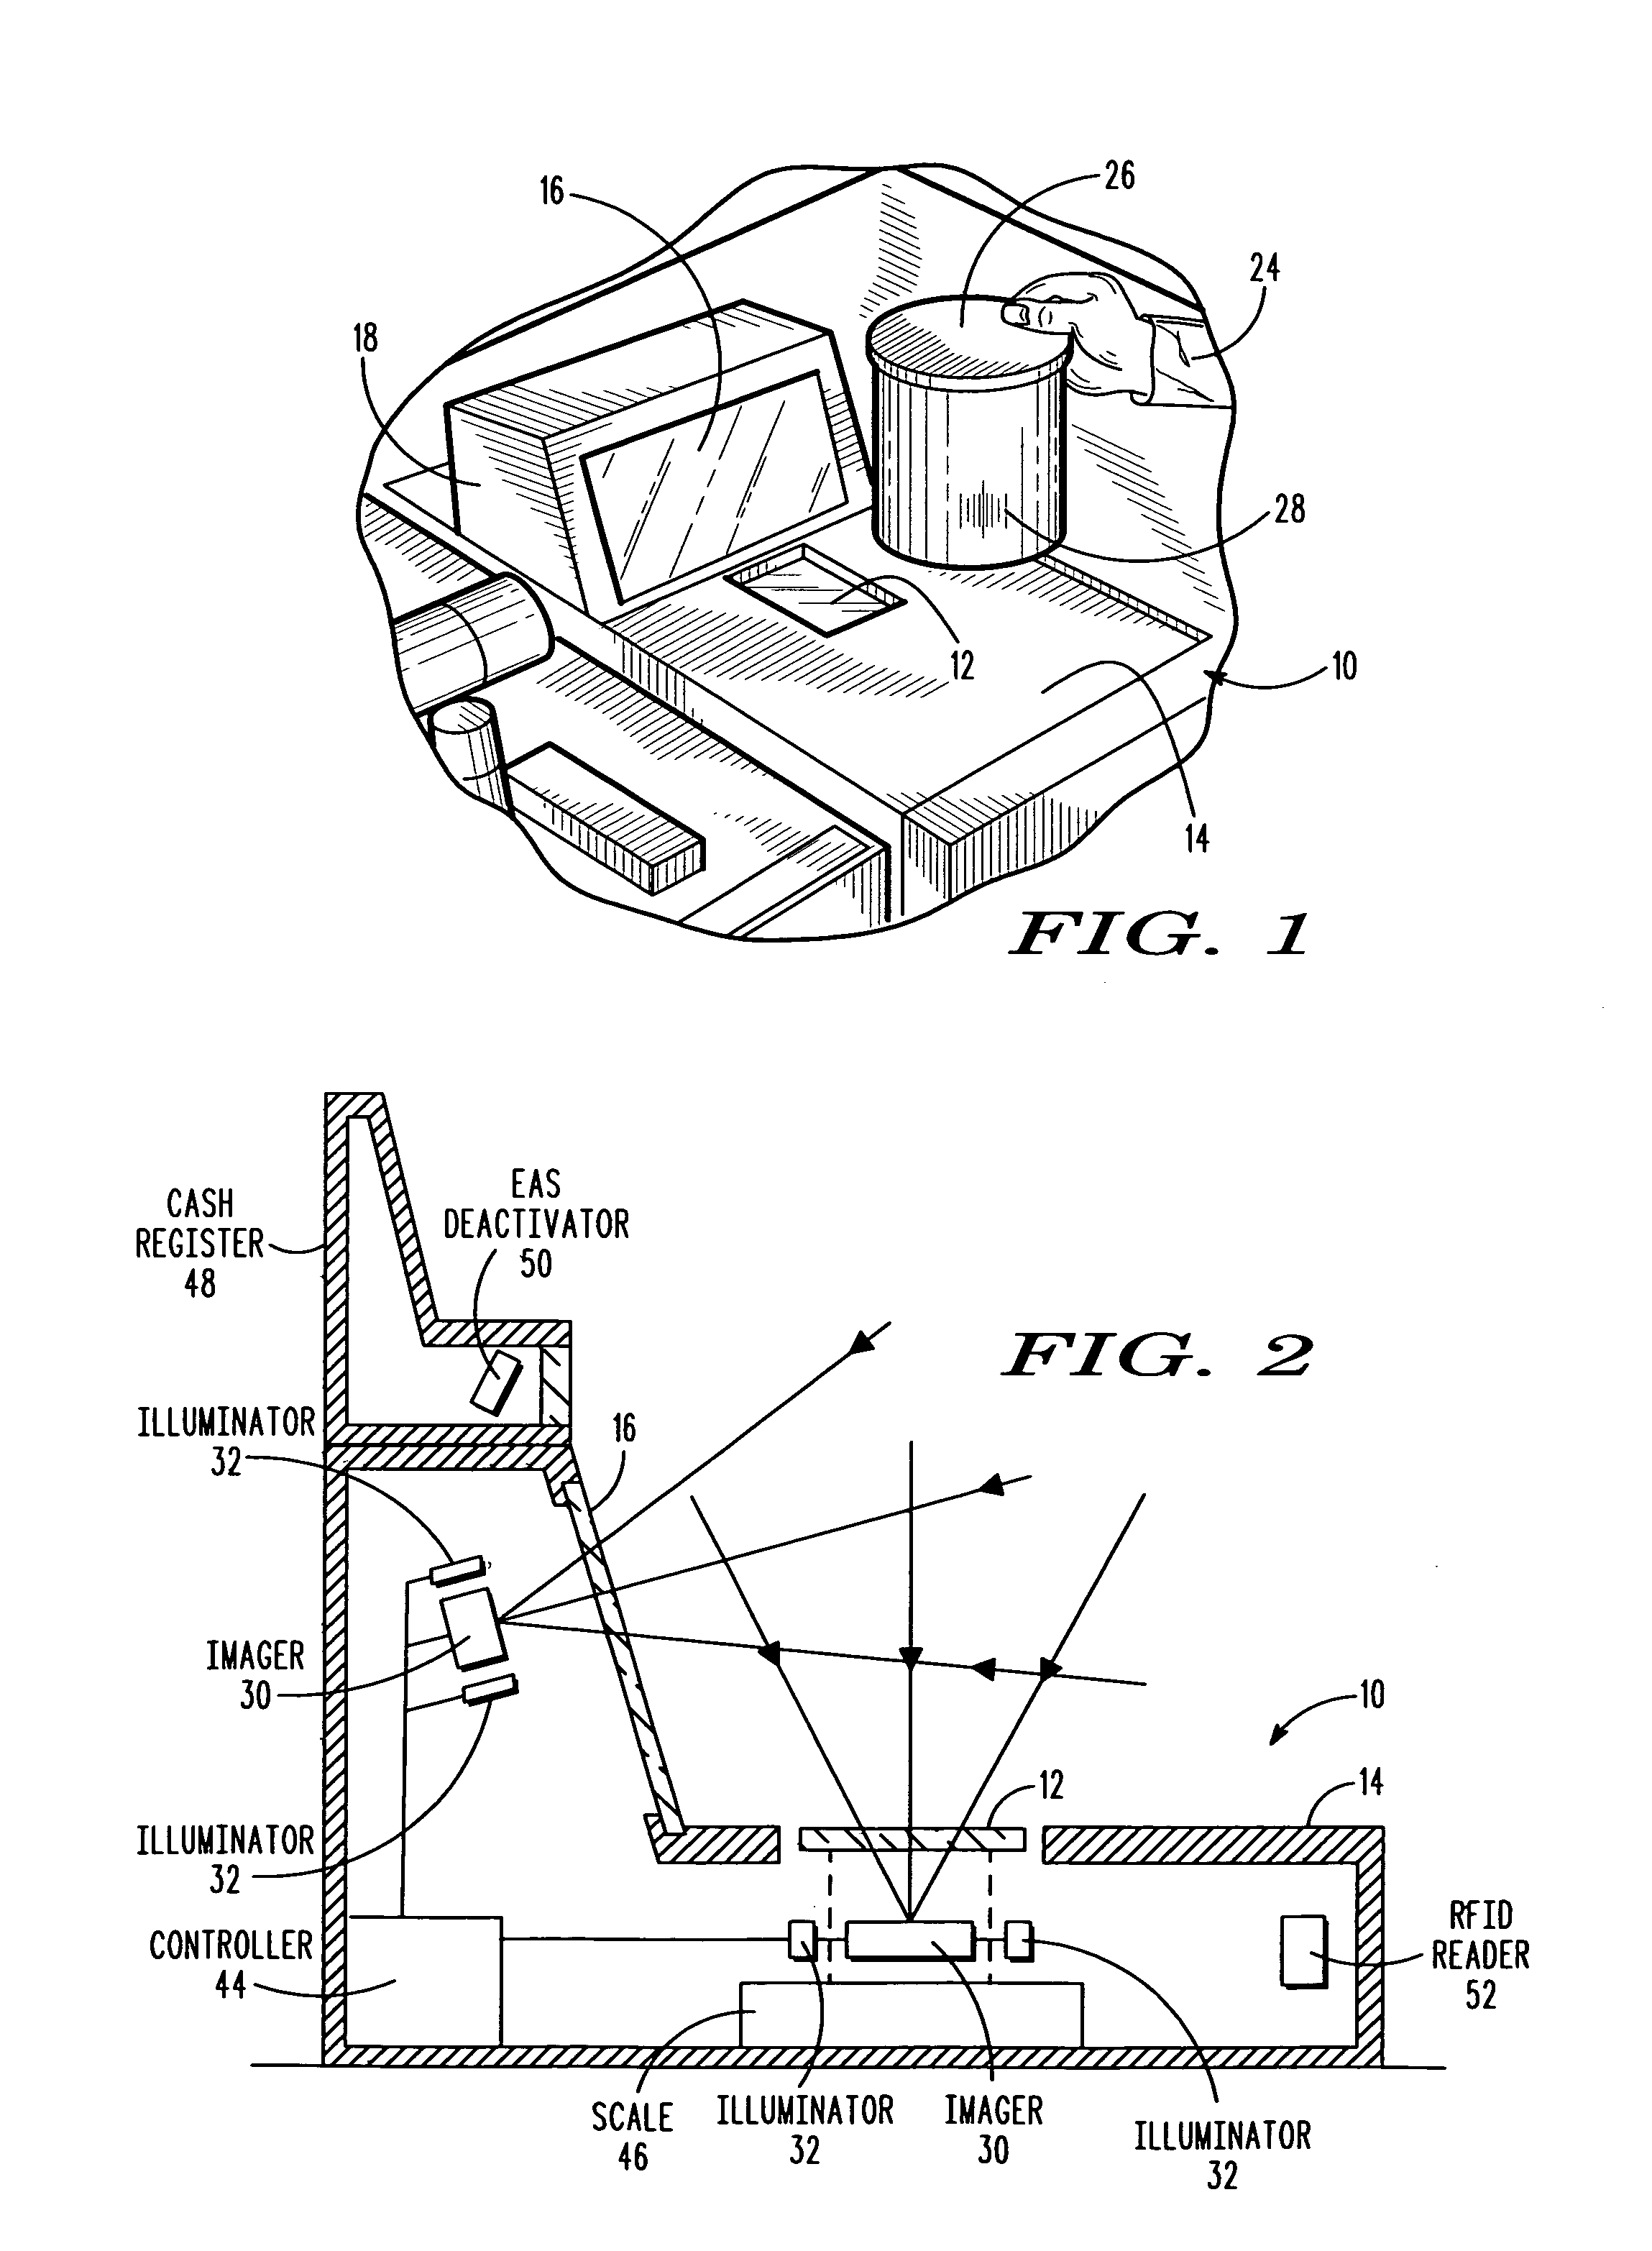 Electro-optical imaging reader having plural solid-state imagers with nonconcurrent exposure